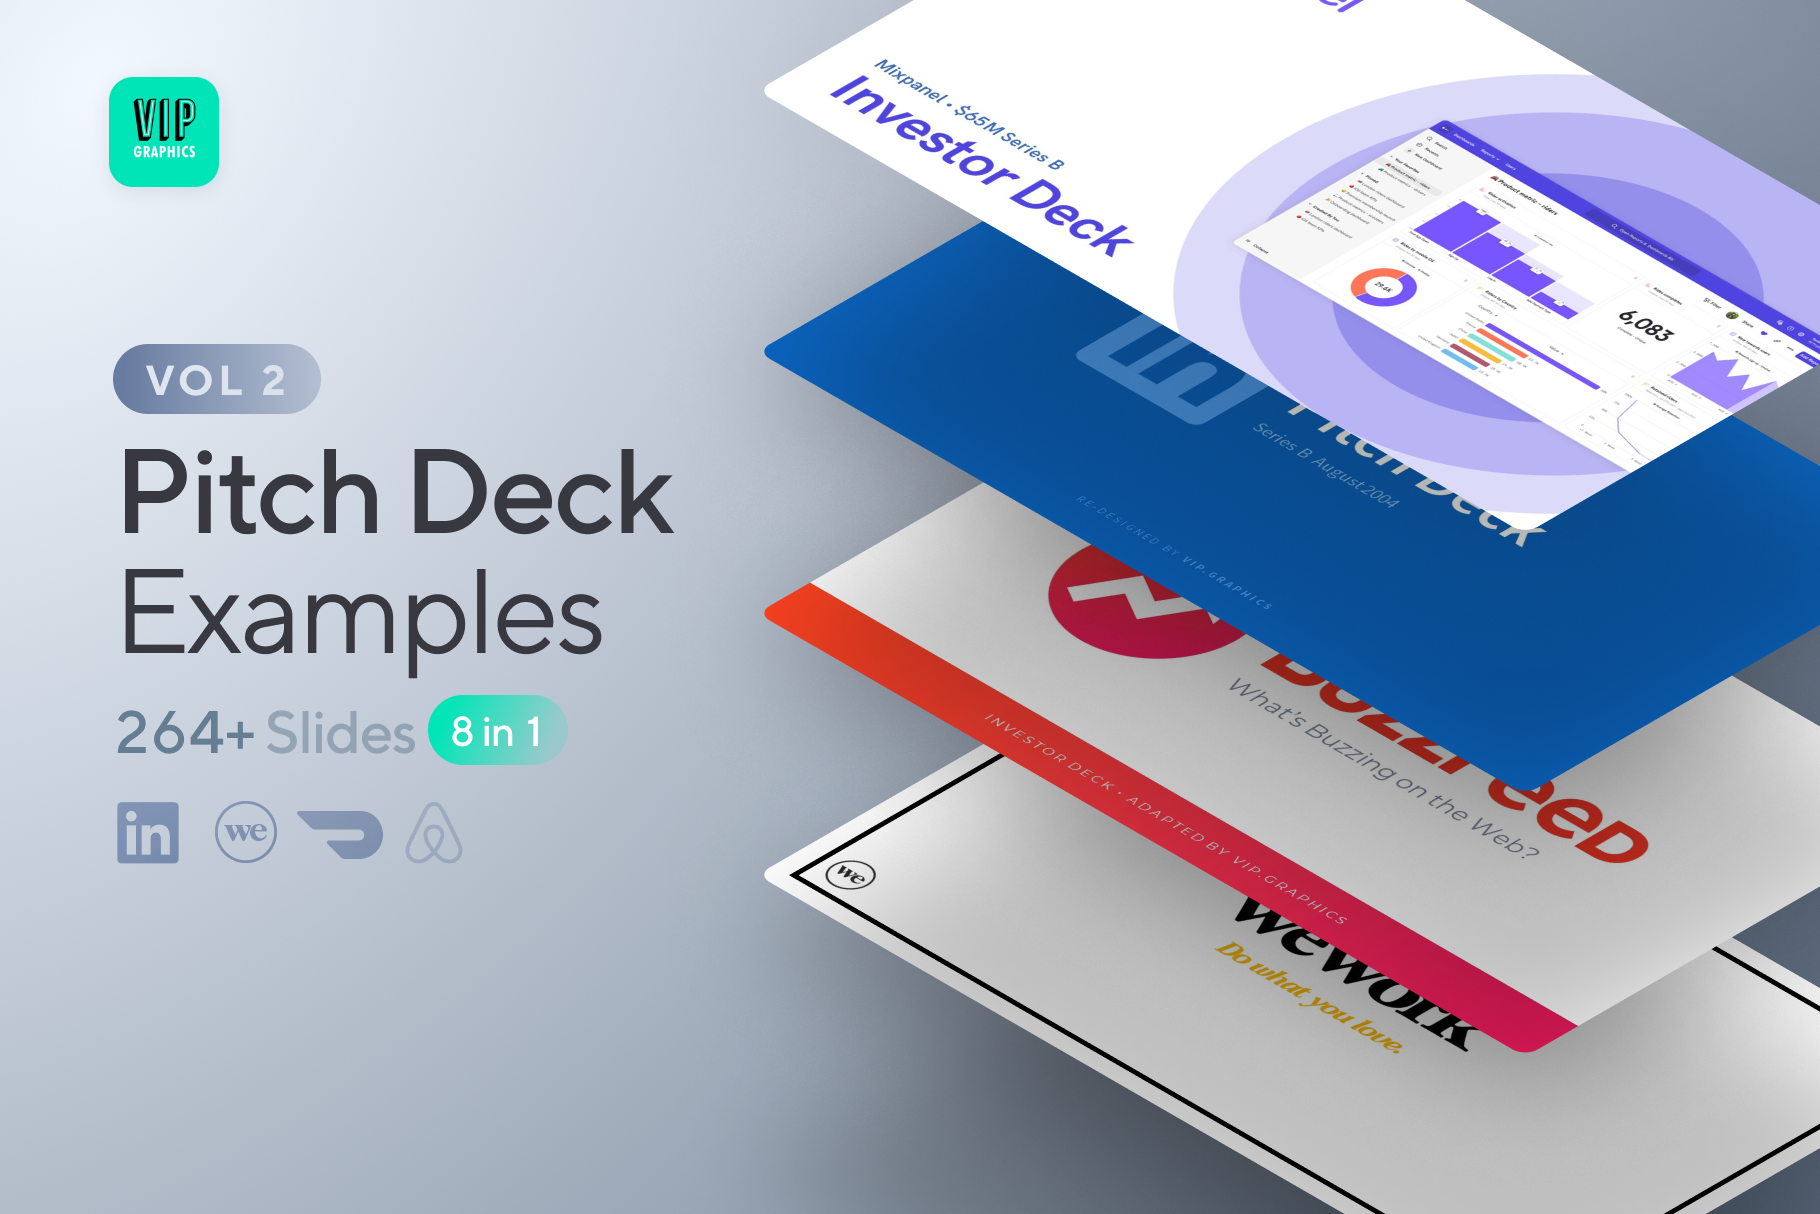 Pitch Deck Examples - Template Bundle: based on winning pitch decks that closed $1B+ for unicorns like LinkedIn, WeWork, Mixpanel, etc.